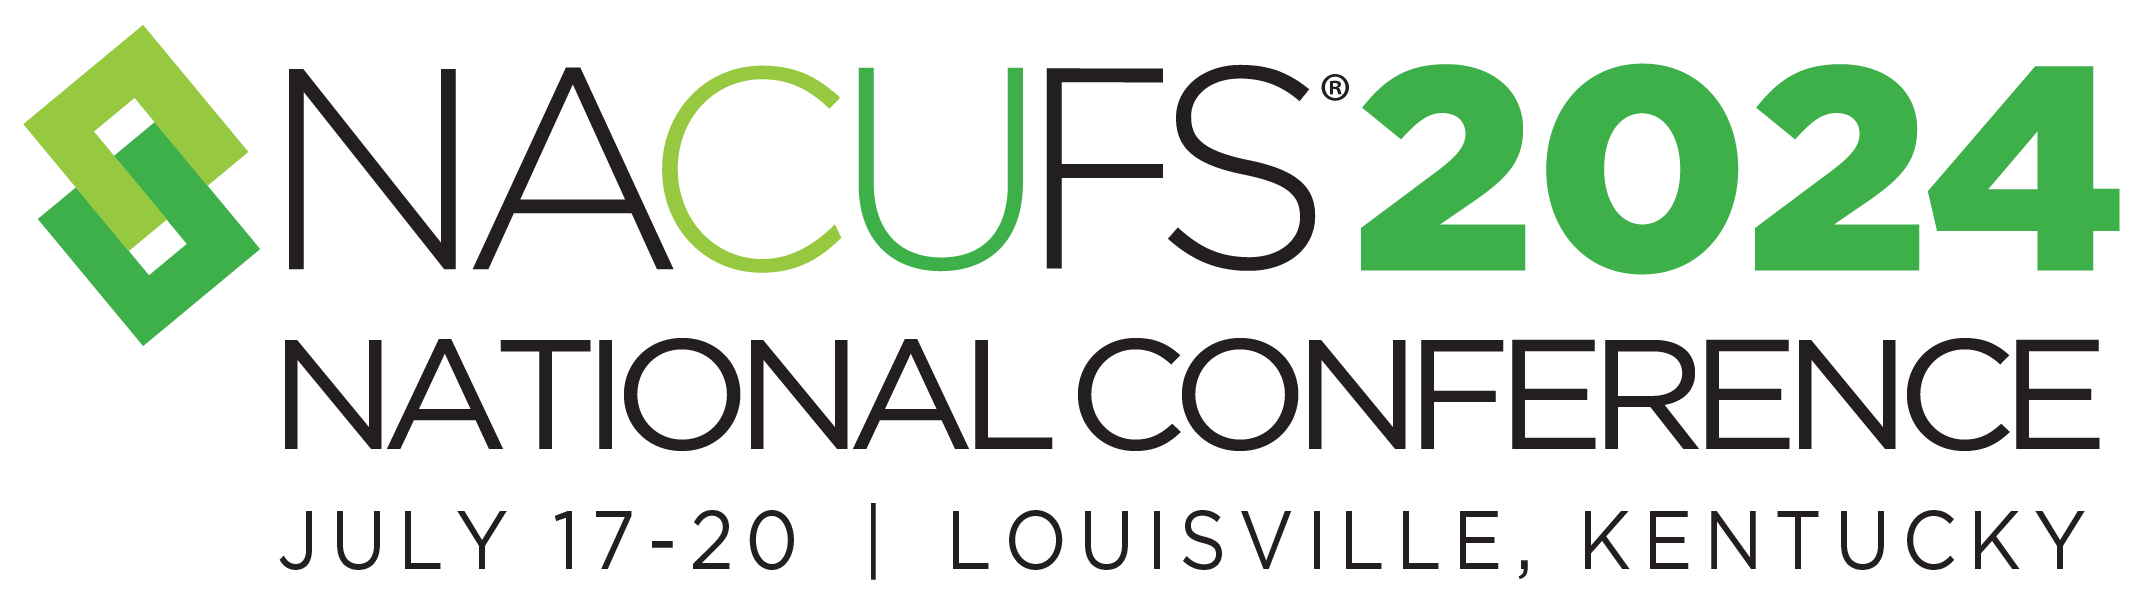 NACUFS 2024 National Conference